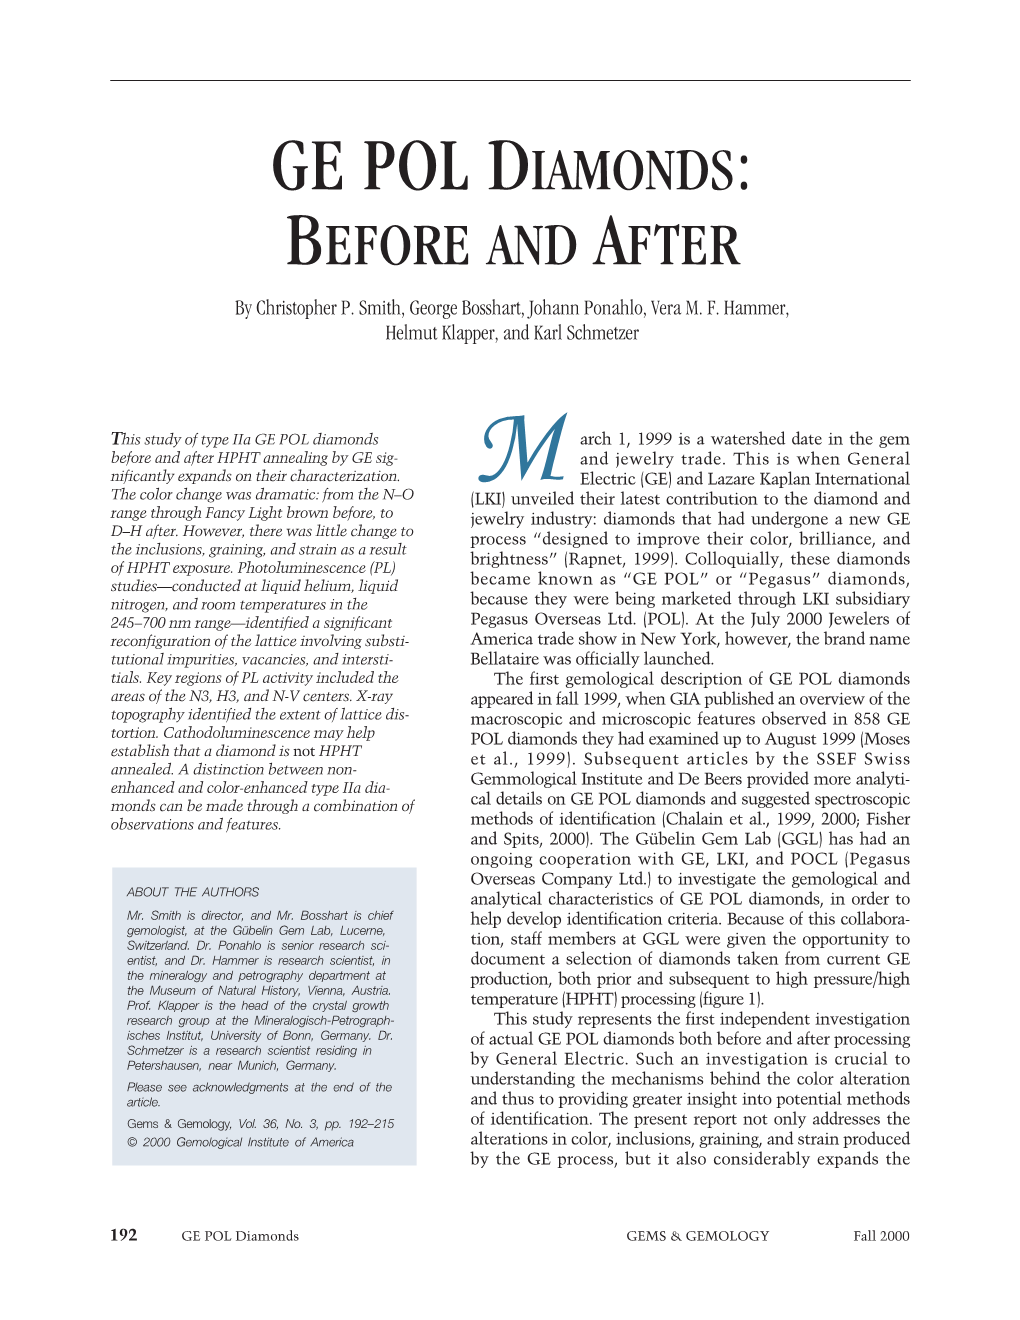 GE POL DIAMONDS: BEFORE and AFTER by Christopher P